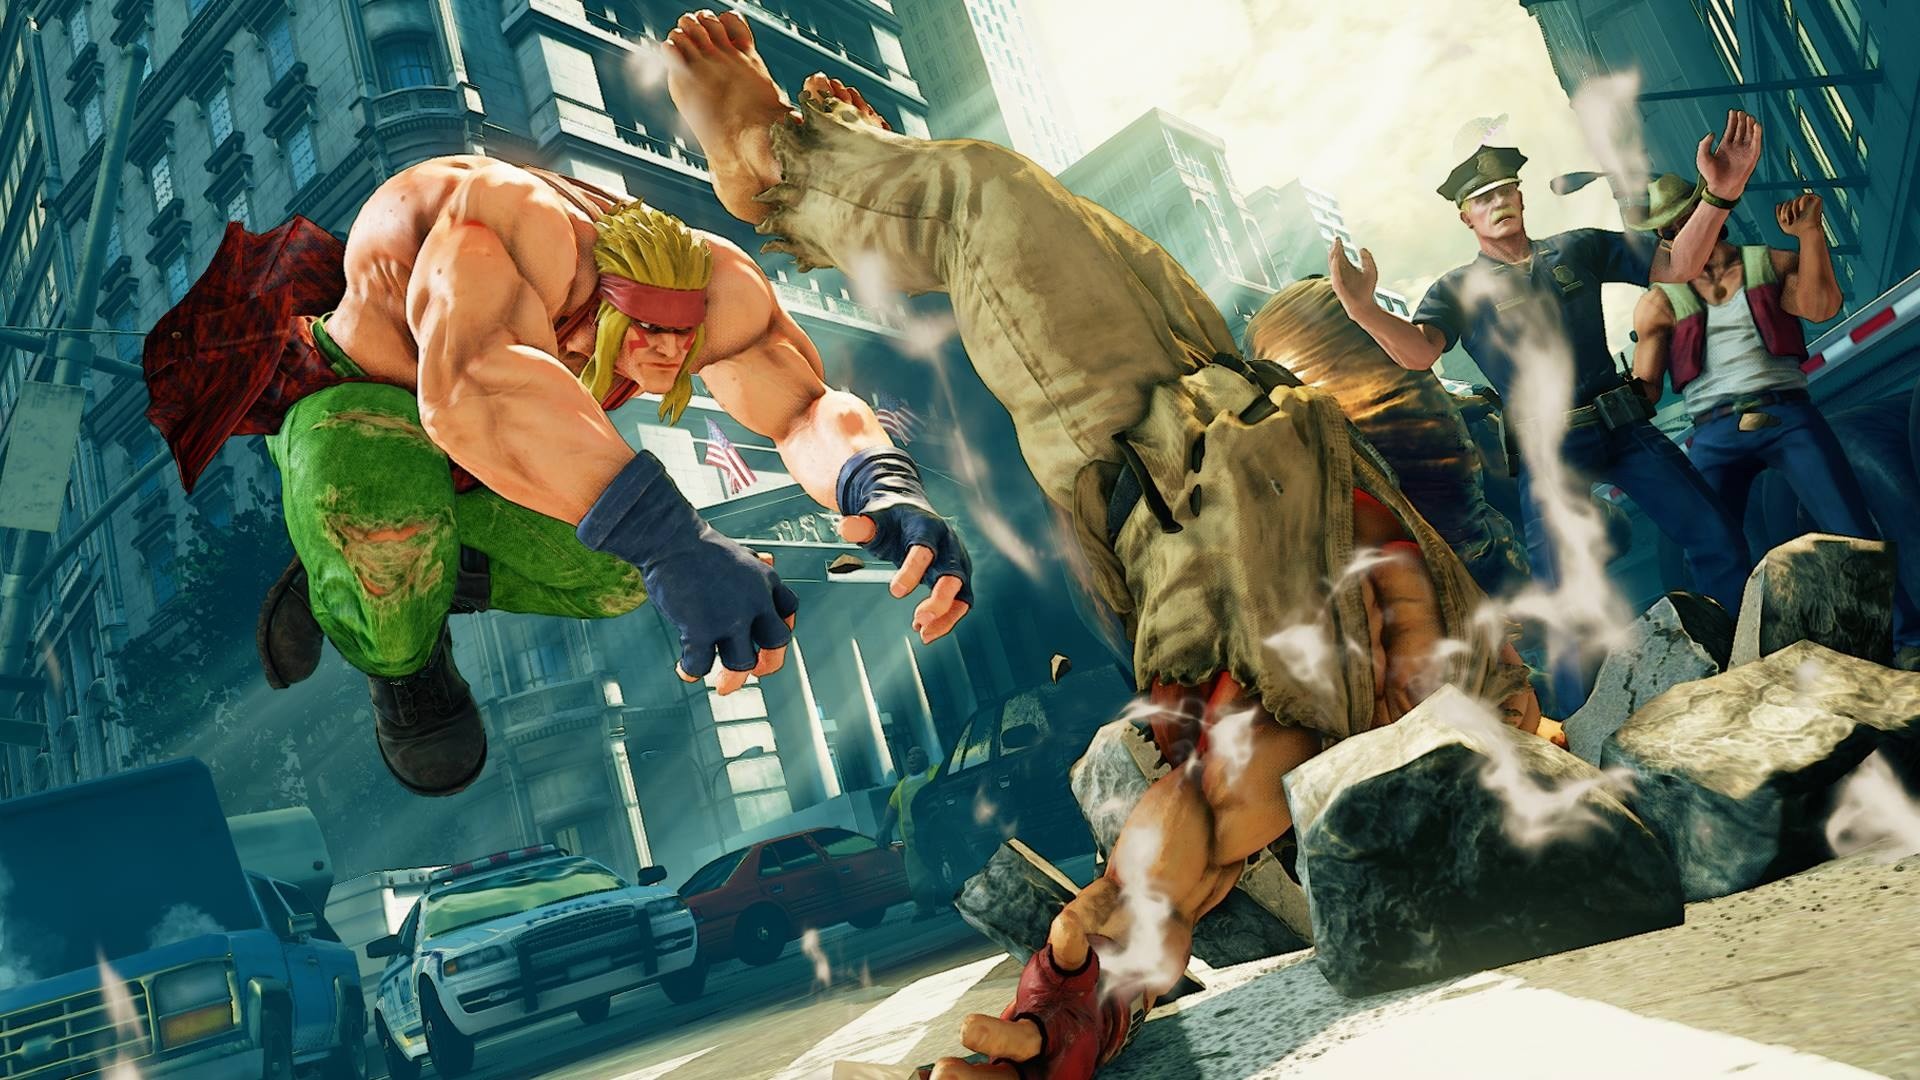 1920x1080 street fighter wallpaper hd backgrounds images